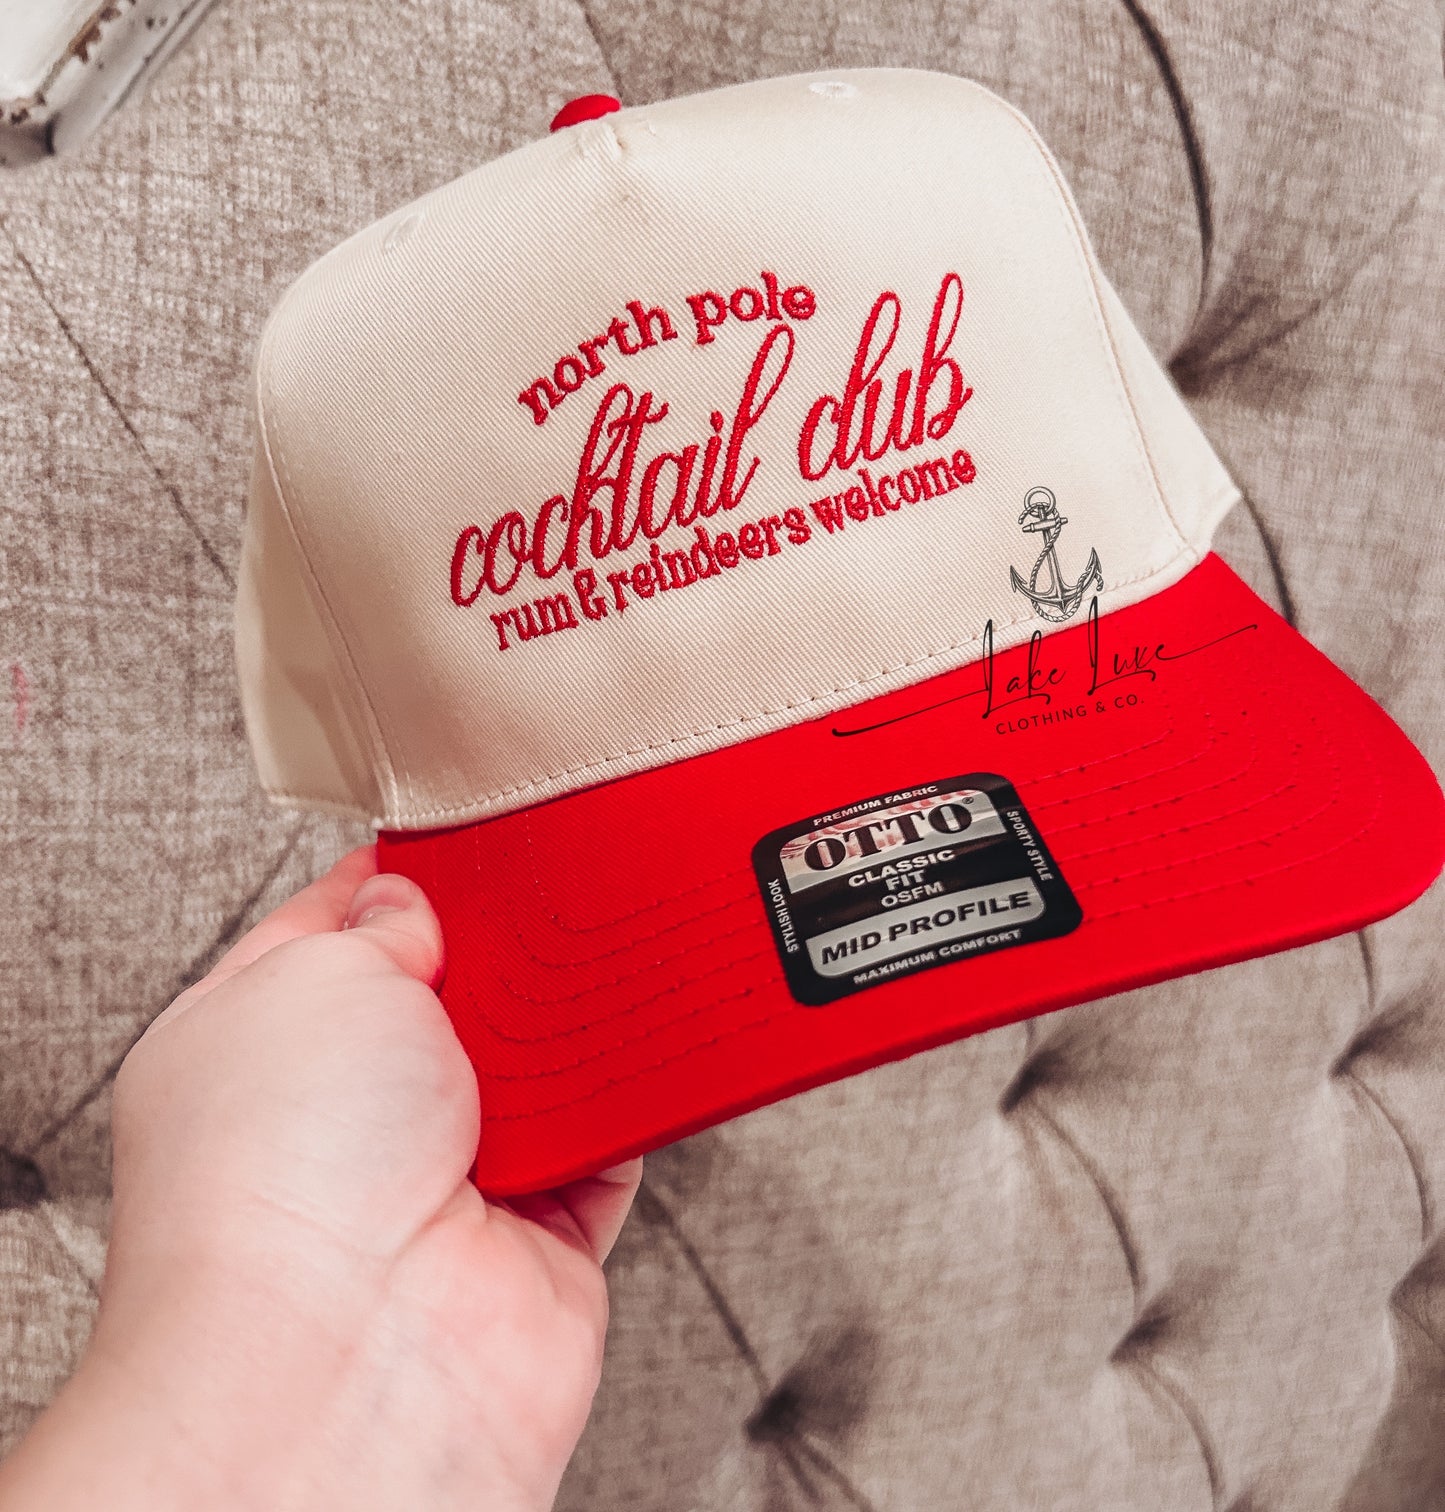 North Pole Cocktail Club hat